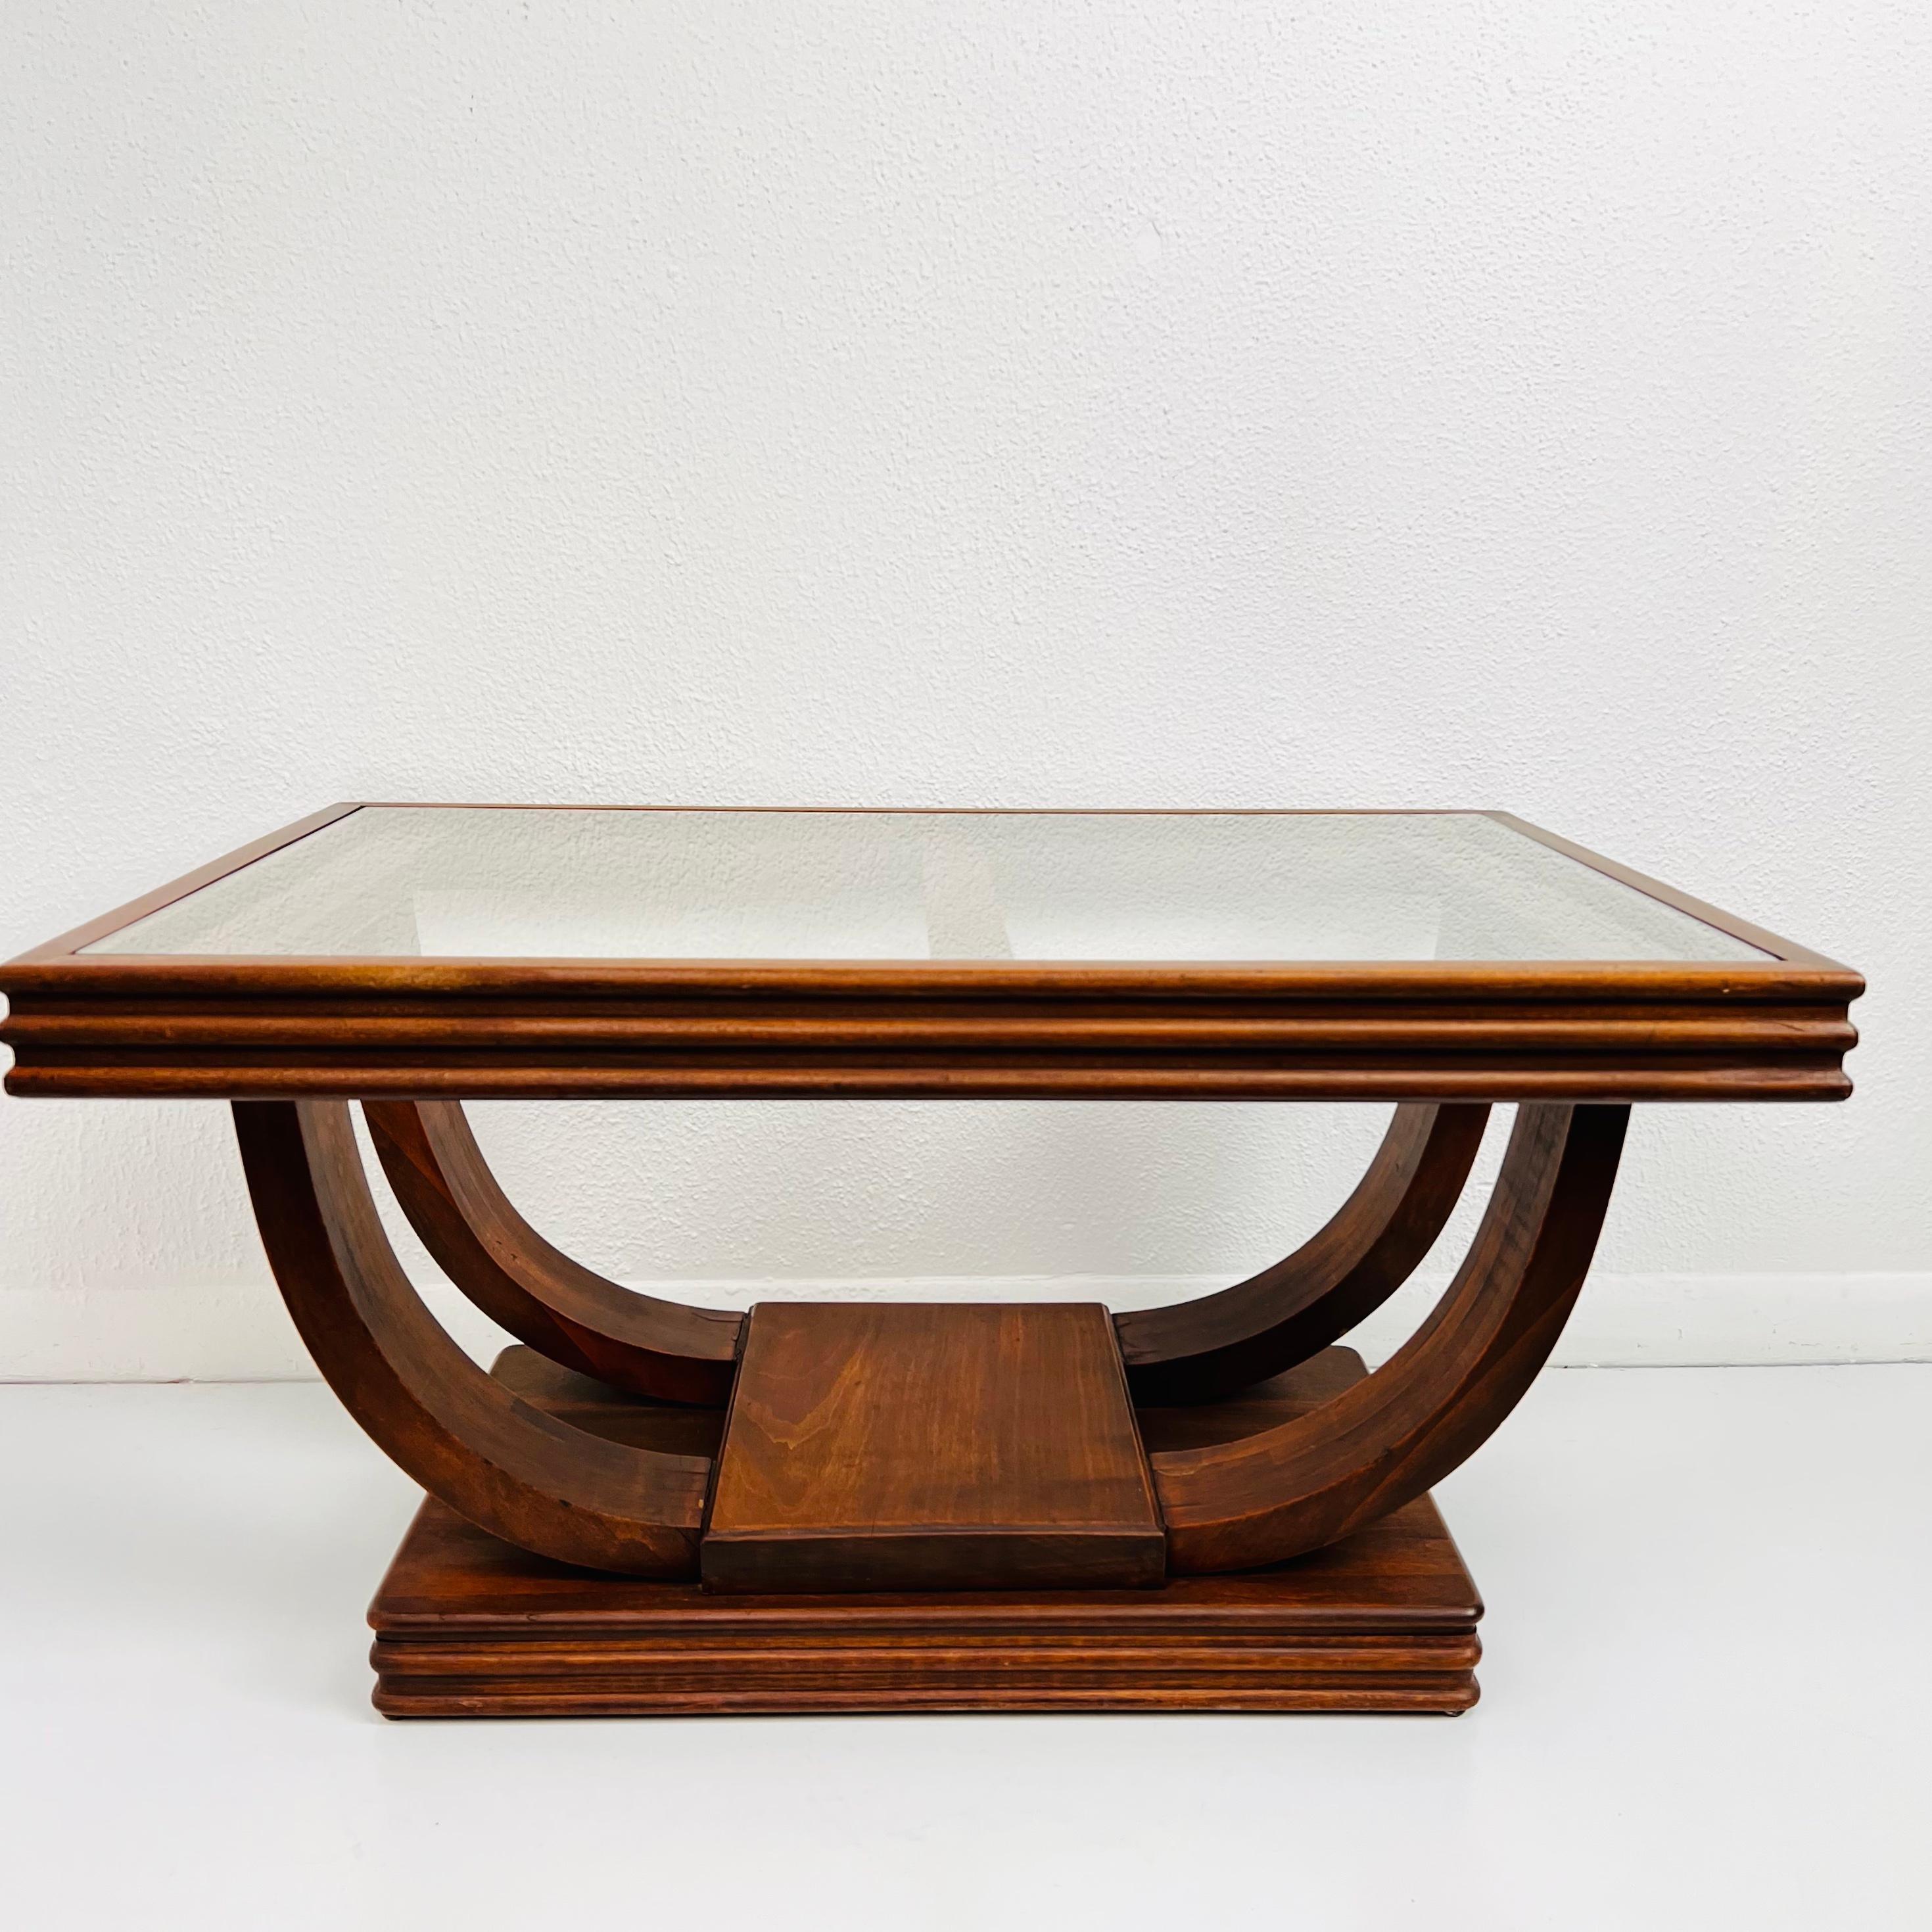 Unique French gondola wood coffee table in the Art Deco style, circa 1930s. Double stretcher U-shaped base supports a Walnut and glass top. Very good antique condition.